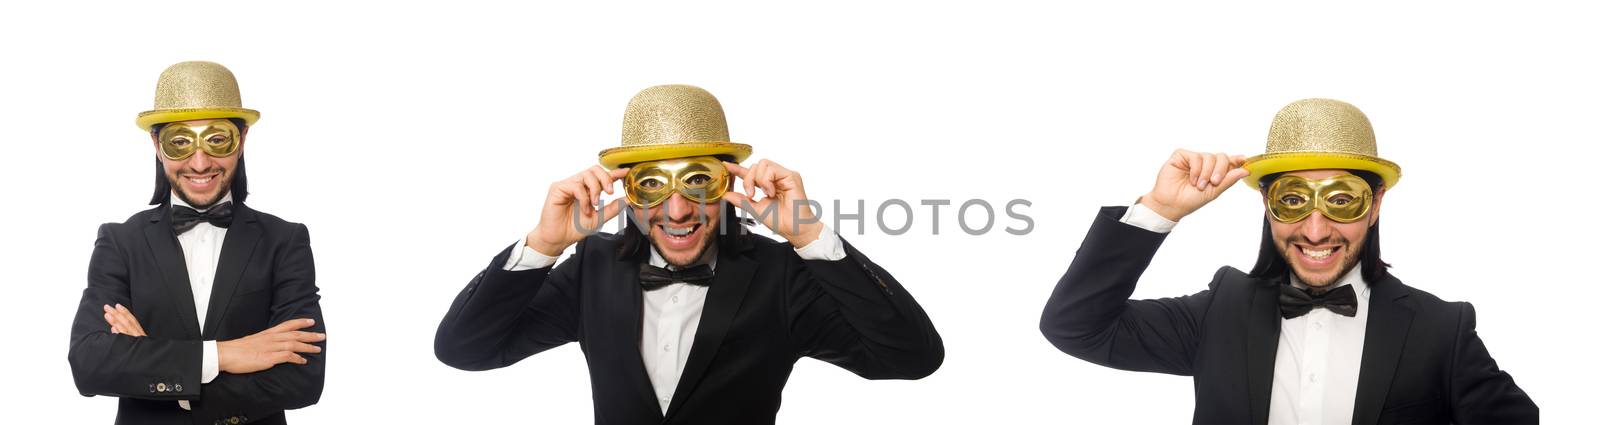 Funny man wearing mask isolated on white by Elnur